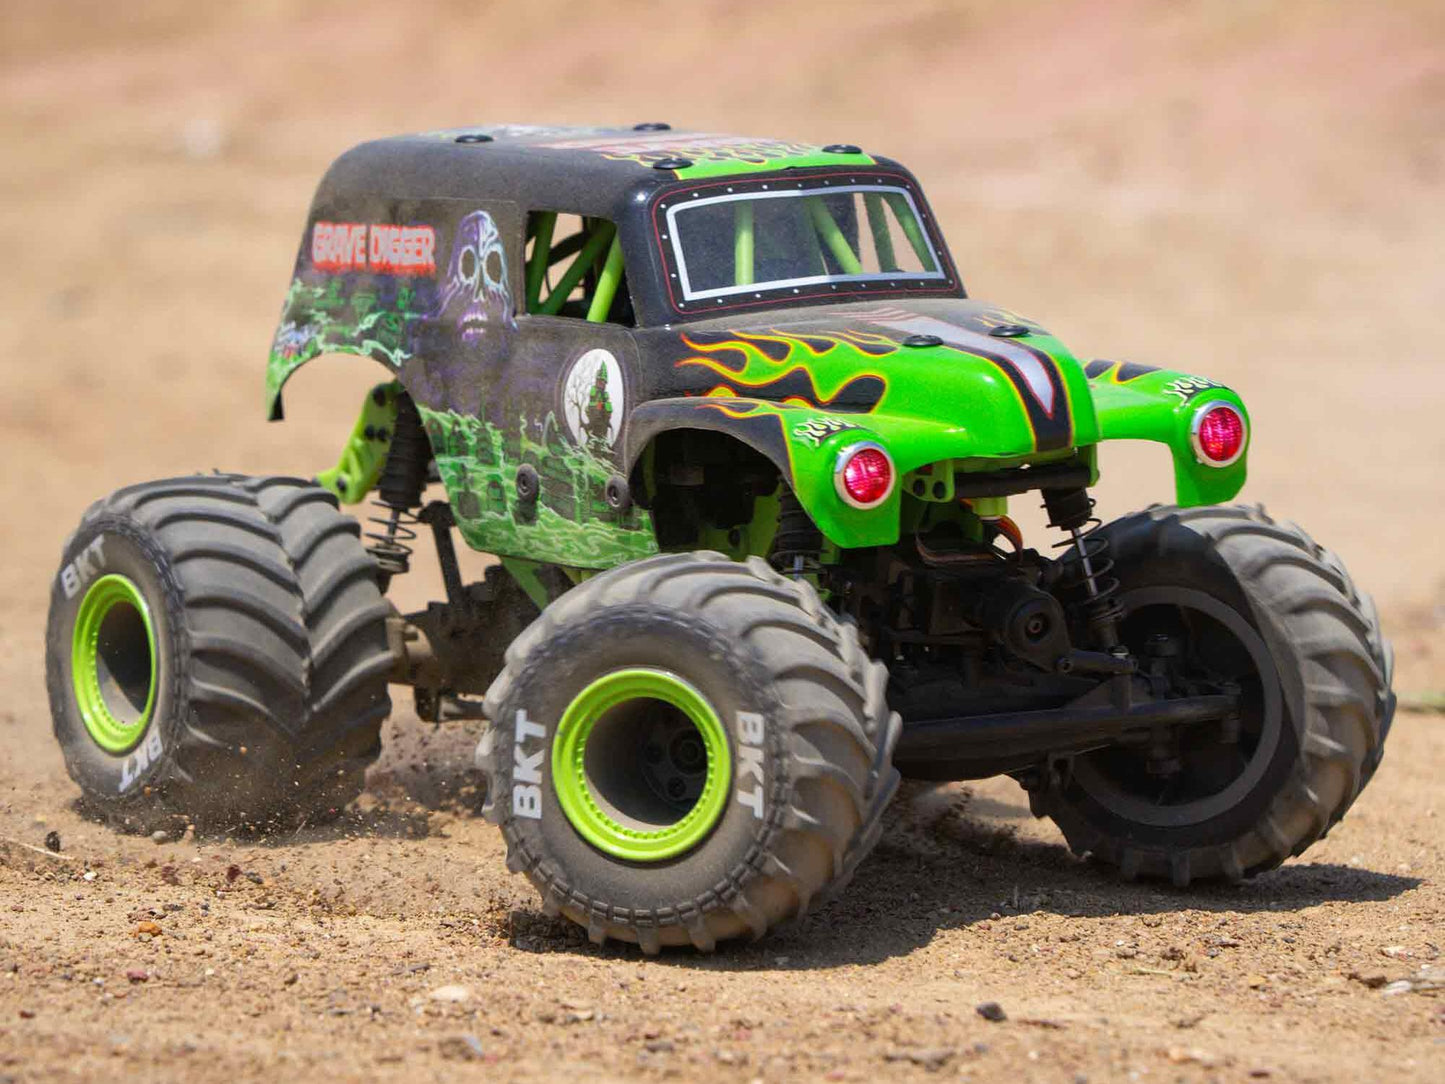 Losi 1/18 Mini LMT 4X4 Brushed Monster Truck RTR - Grave Digger  LOS01026T1